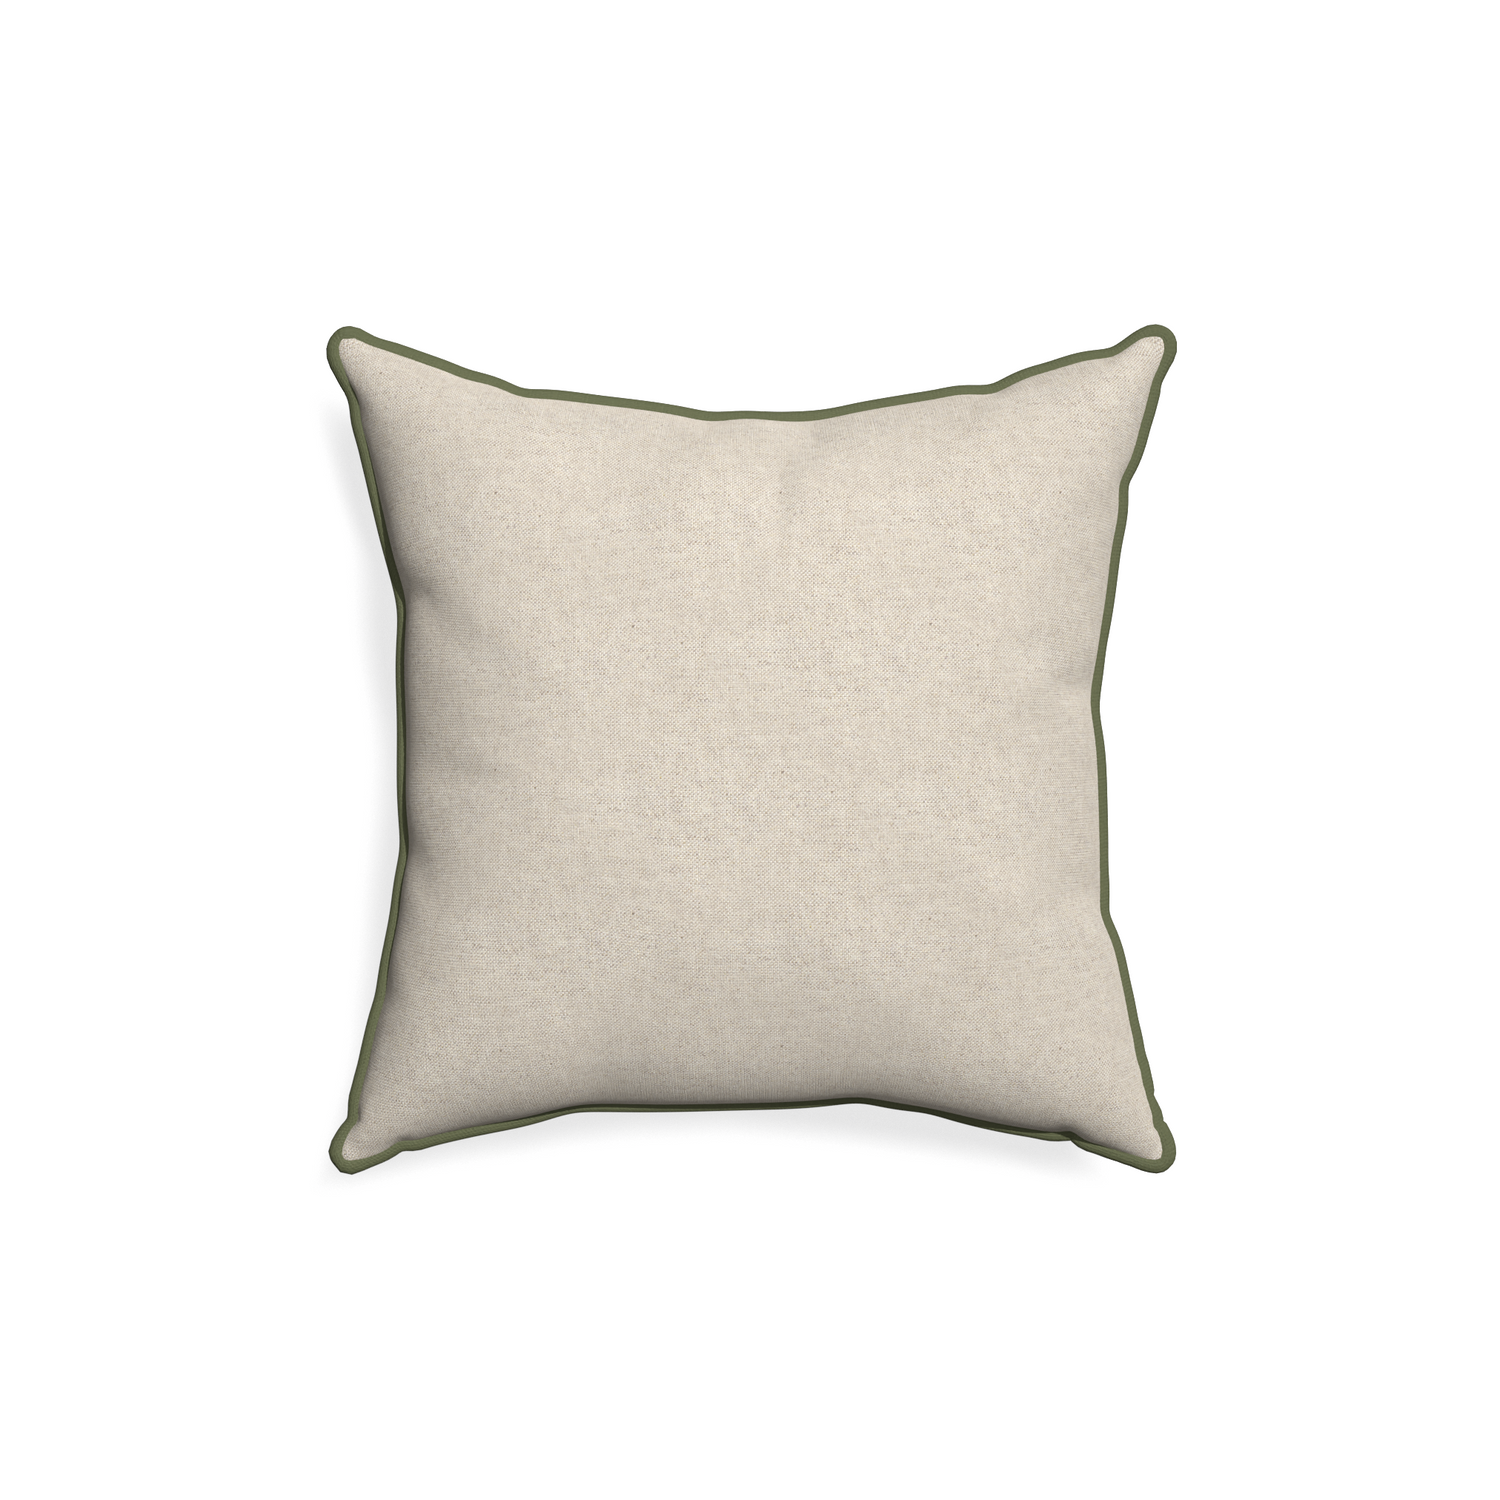 18-square oat custom pillow with f piping on white background